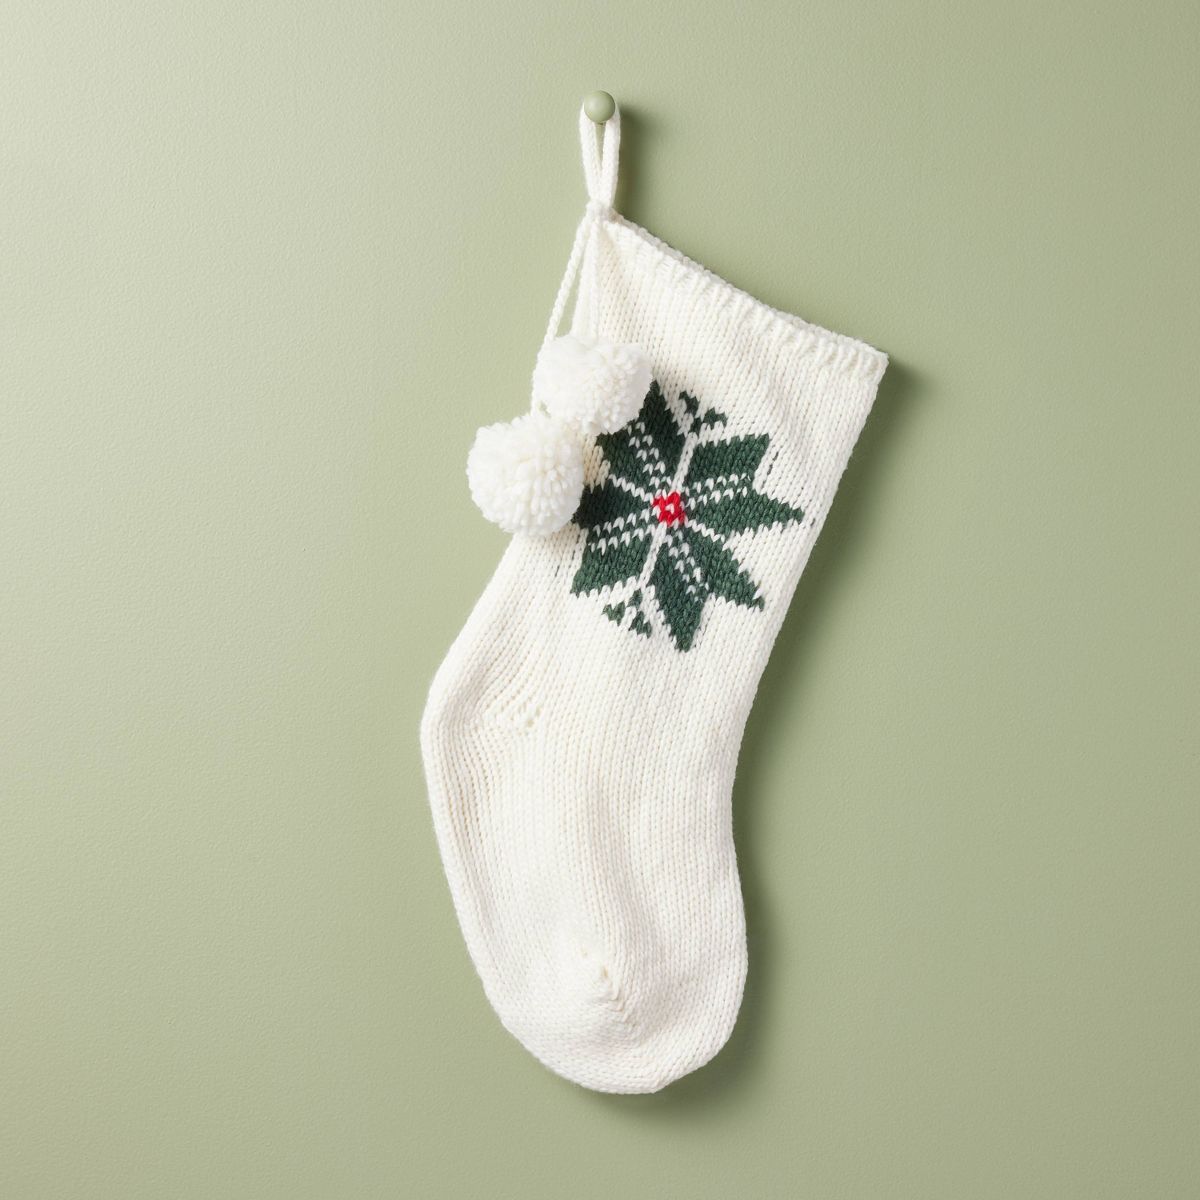 Snowflake Knit Christmas Stocking Cream/Green/Red - Hearth & Hand™ with Magnolia | Target